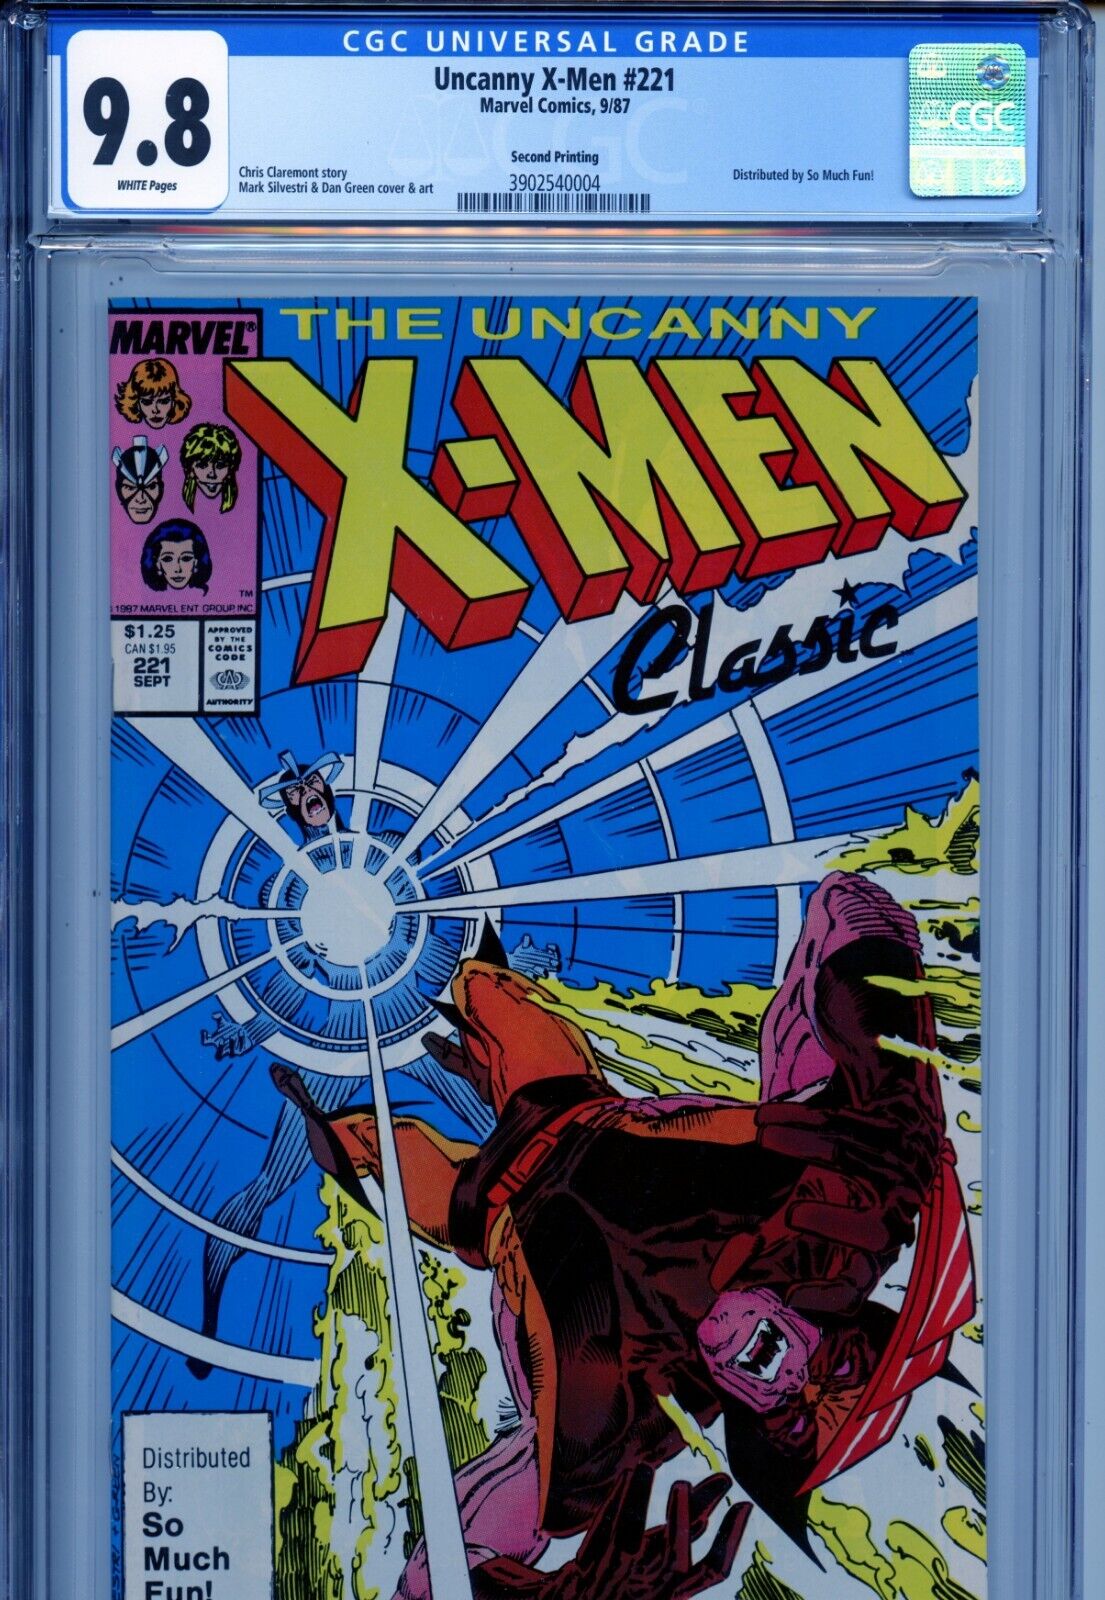 1987 MARVEL UNCANNY XMEN 221 2ND PRINTING DIST BY SO MUCH FUN  CGC 98 WP